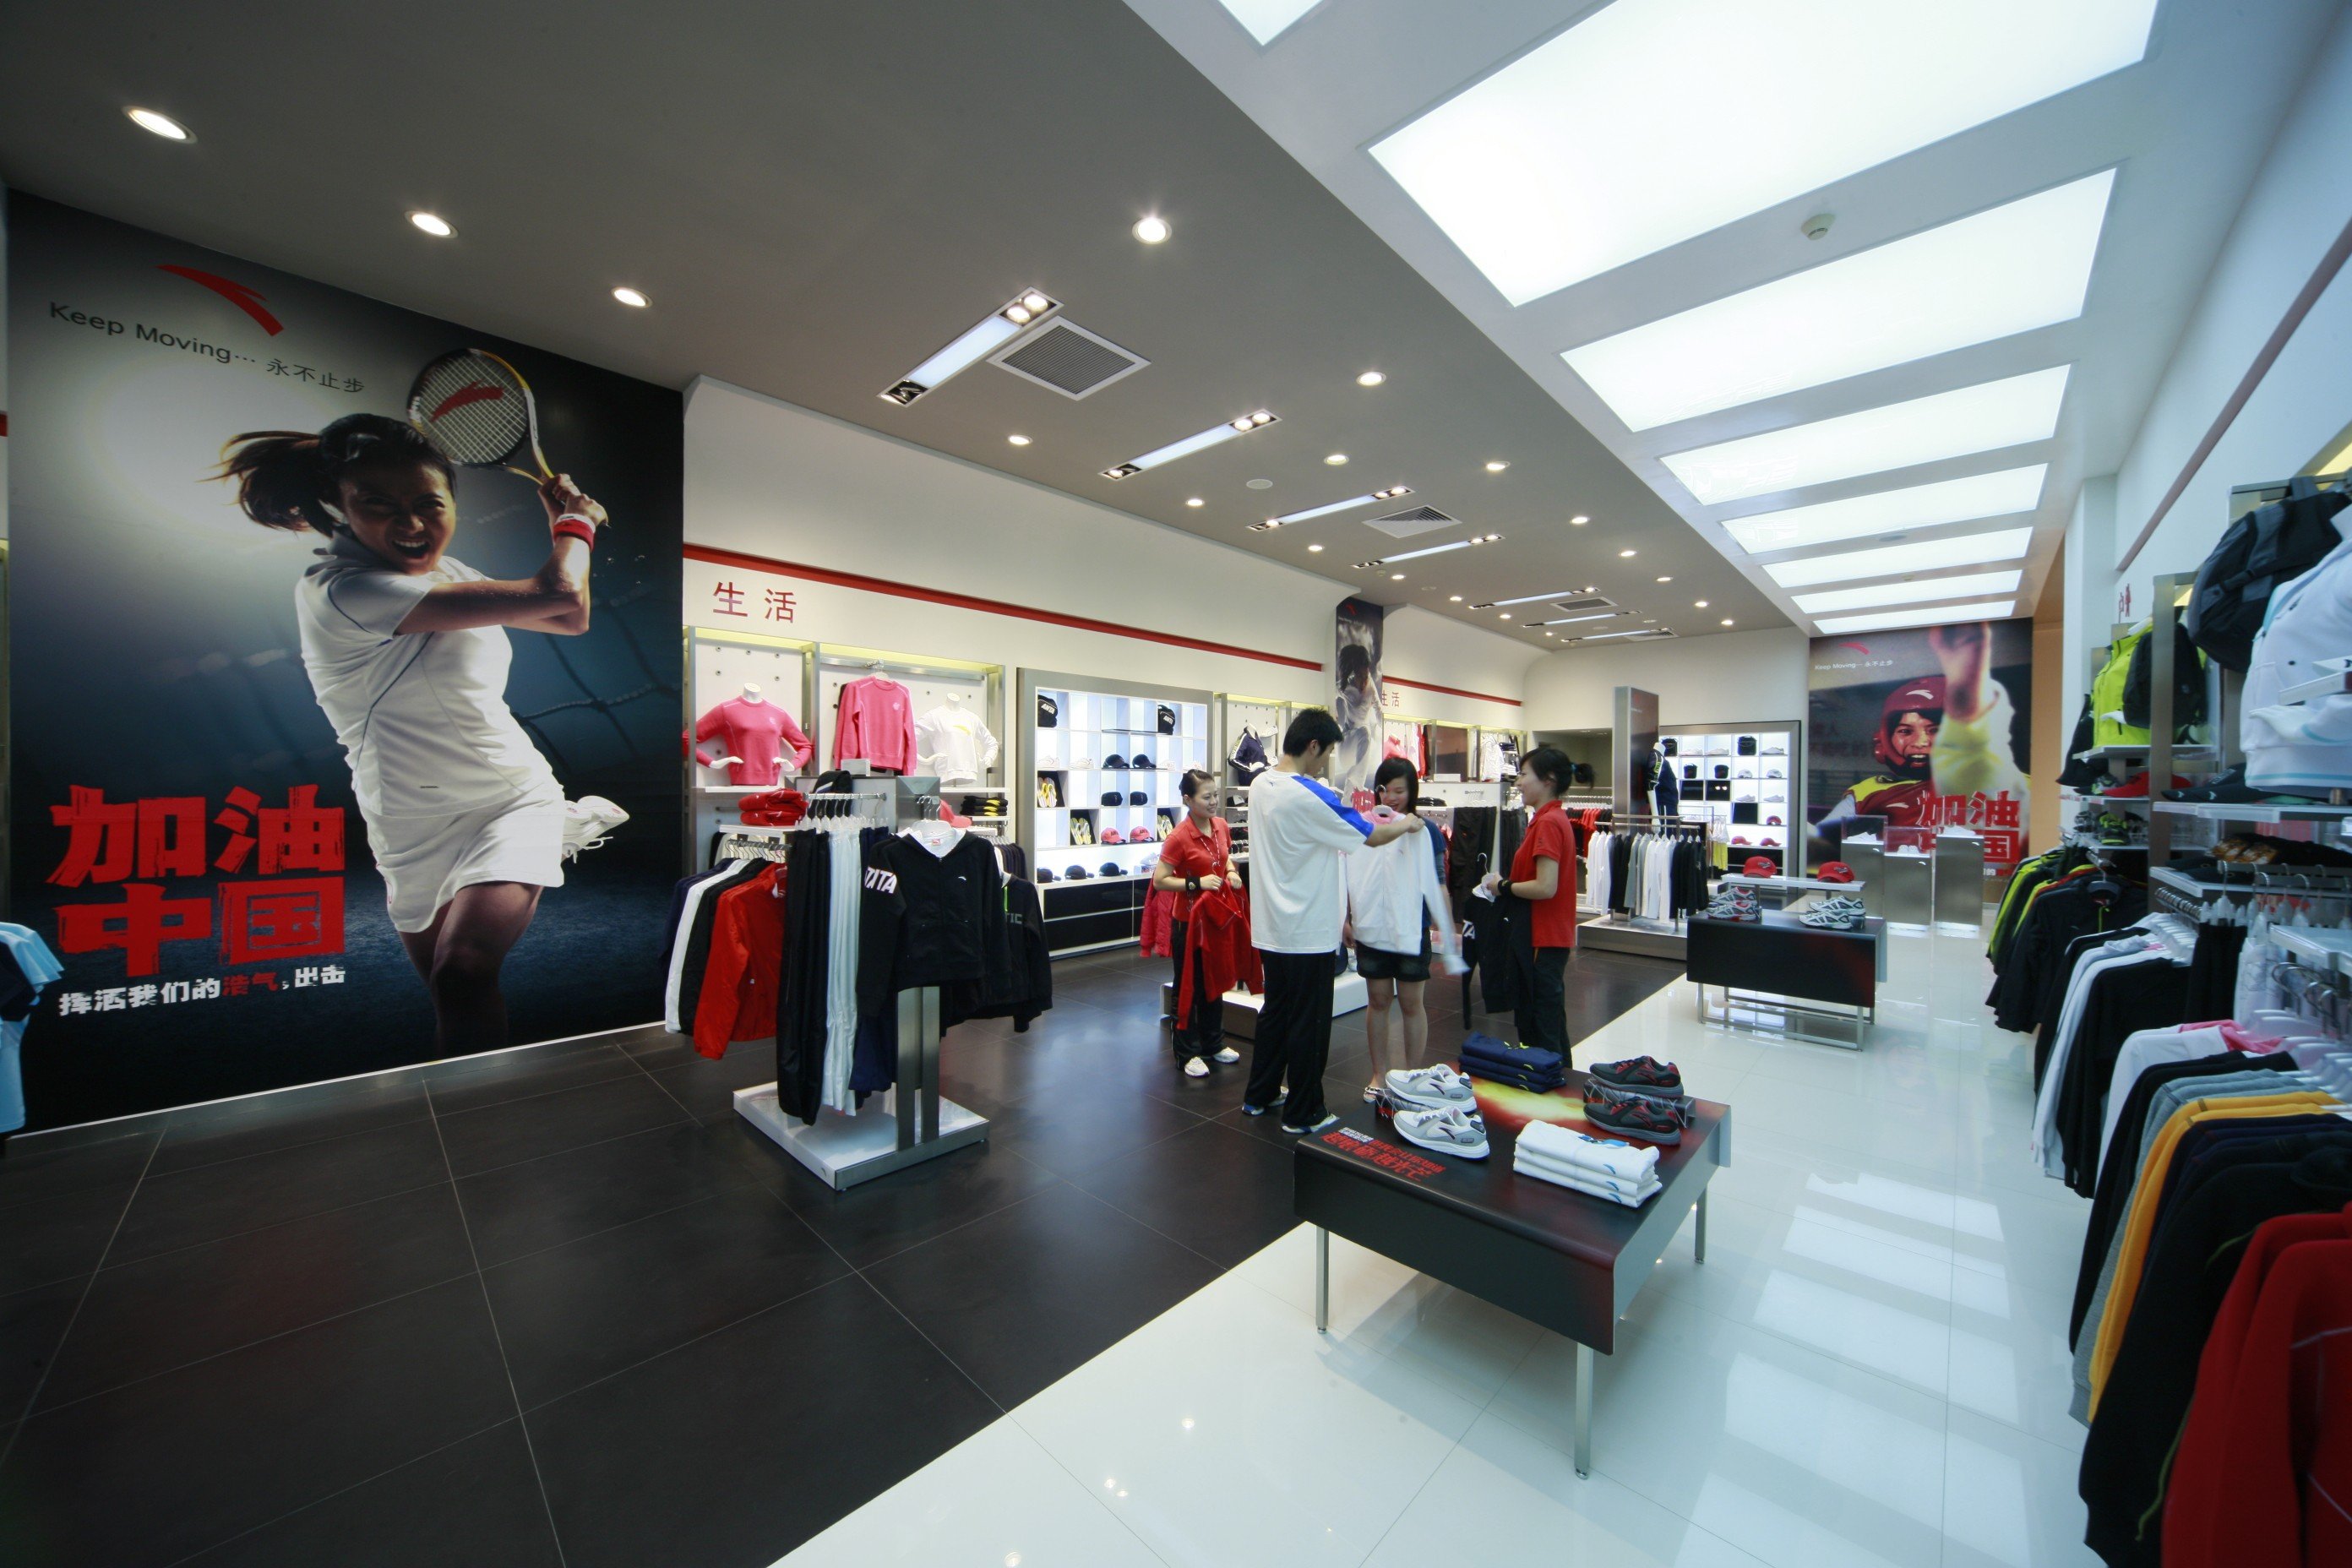 Shares in Anta Sports rose by close to 3 per cent in early morning trade on Friday. Photo: SCMP